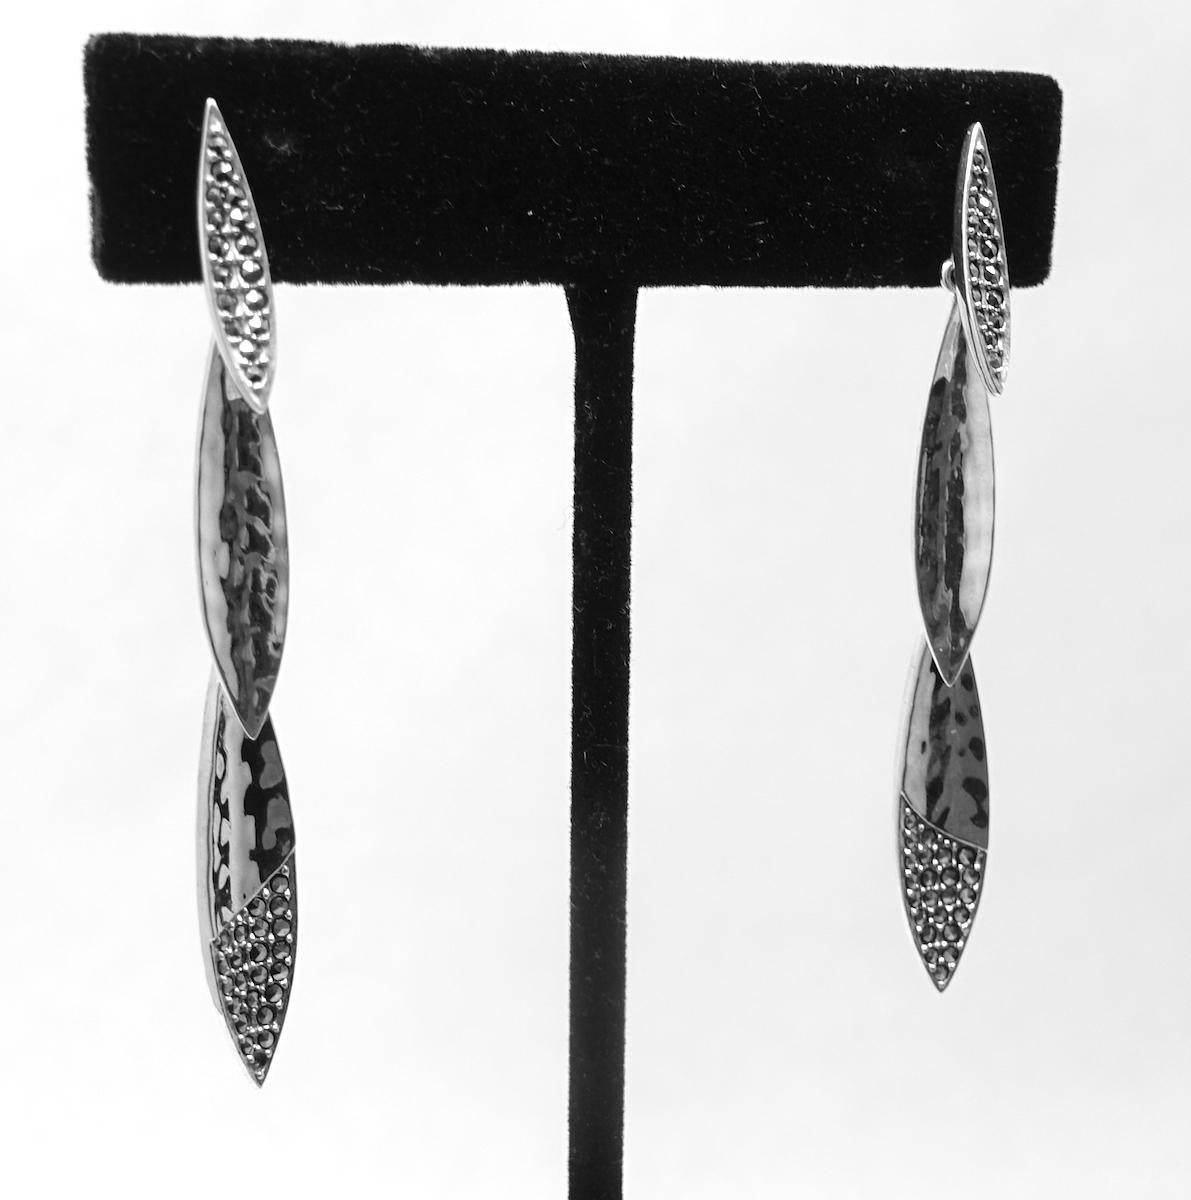 These vintage drop earrings feature marcasites in a sterling silver setting.  These pierced earrings measure 2-3/8” x ¼” and are in excellent condition.